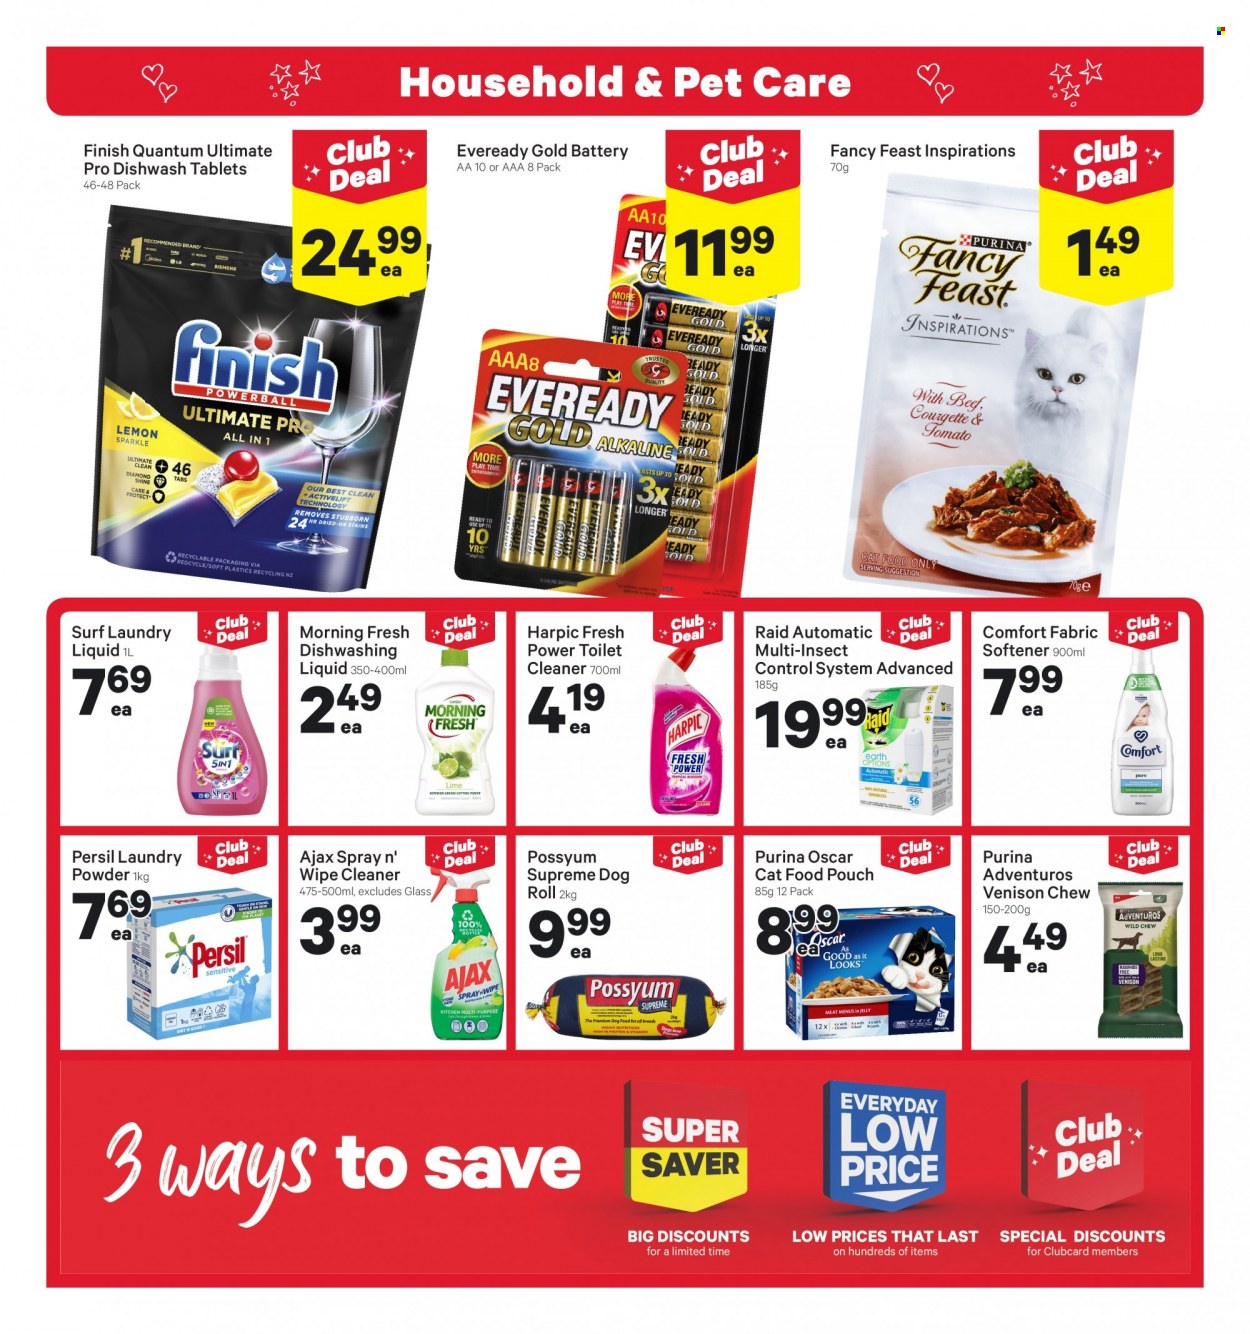 thumbnail - New World mailer - 06.02.2023 - 12.02.2023 - Sales products - cleaner, toilet cleaner, Harpic, Ajax, Persil, fabric softener, laundry detergent, laundry powder, Surf, Comfort softener, dishwashing liquid, Finish Powerball, Finish Quantum Ultimate, Raid, battery, Eveready, animal food, cat food, dog food, Purina, Fancy Feast. Page 18.